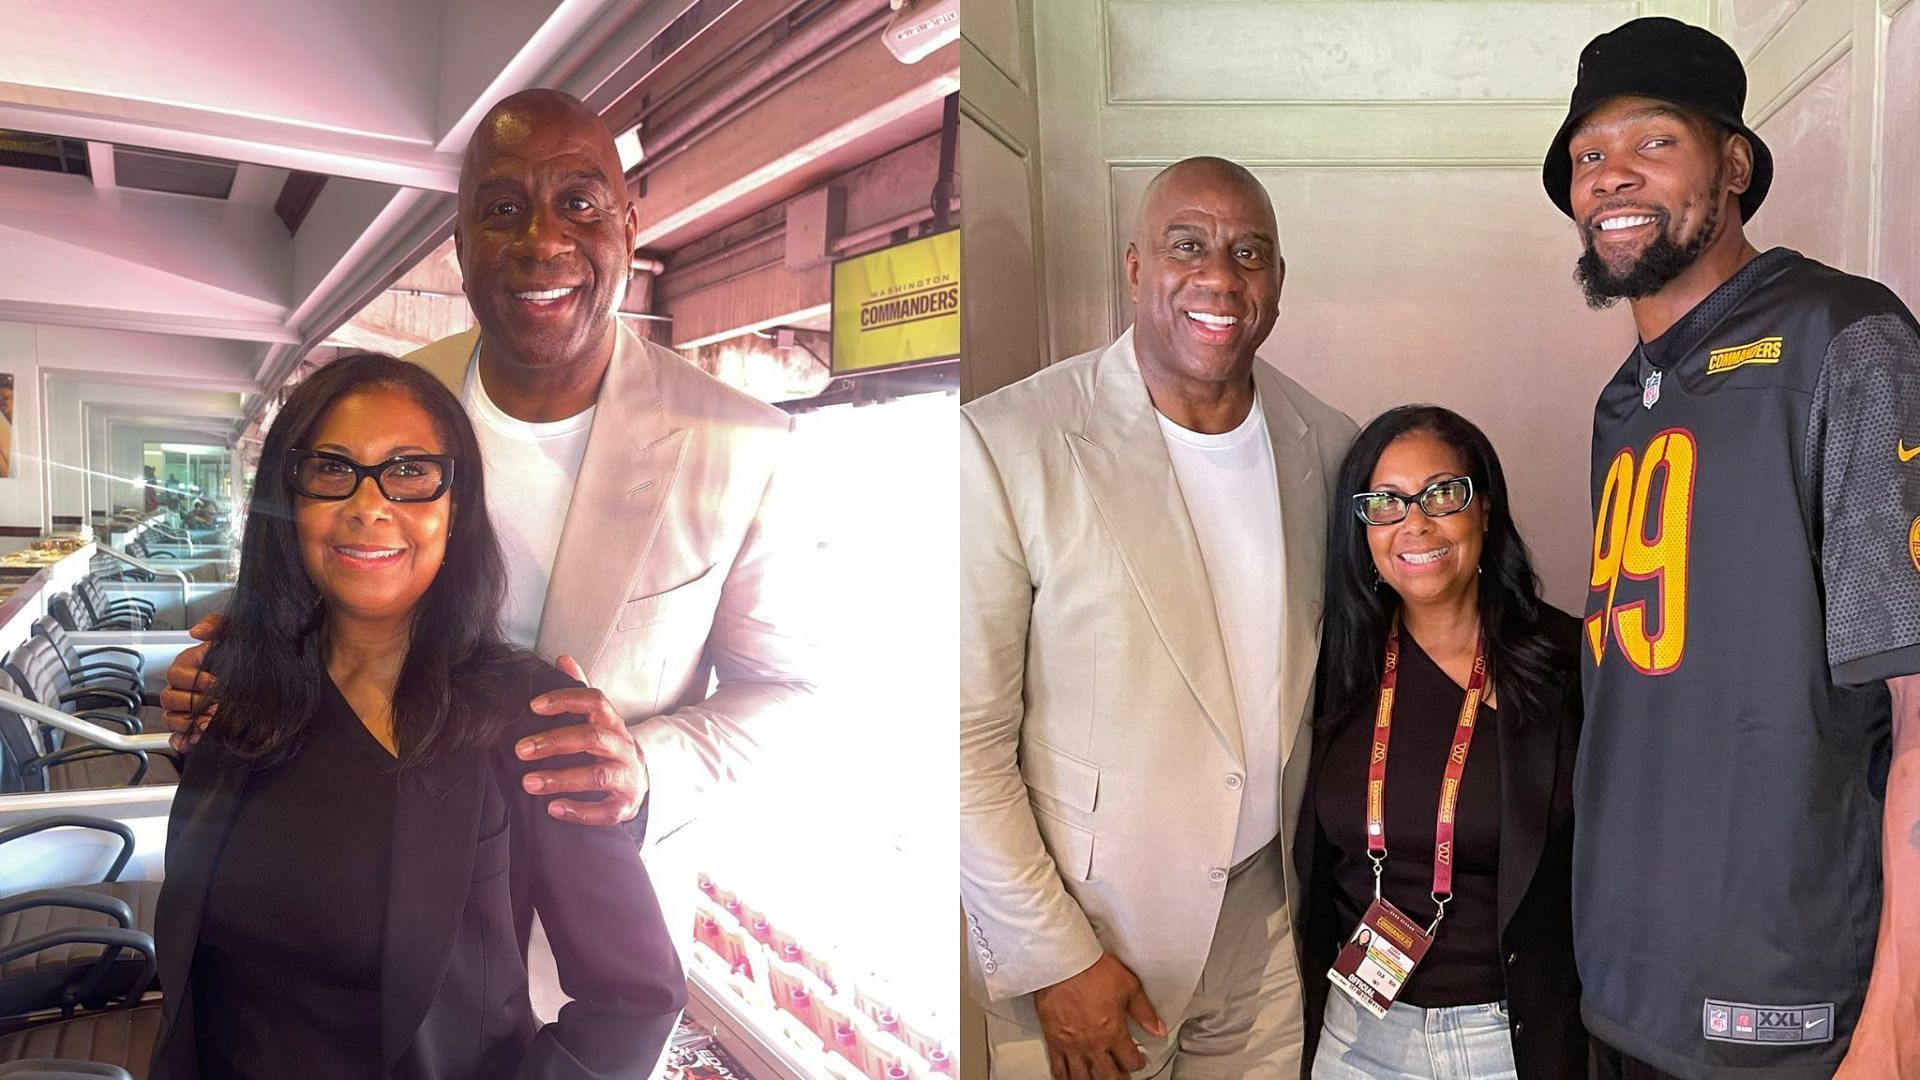 Magic Johnson and wife Cookie attend the Washington Commanders